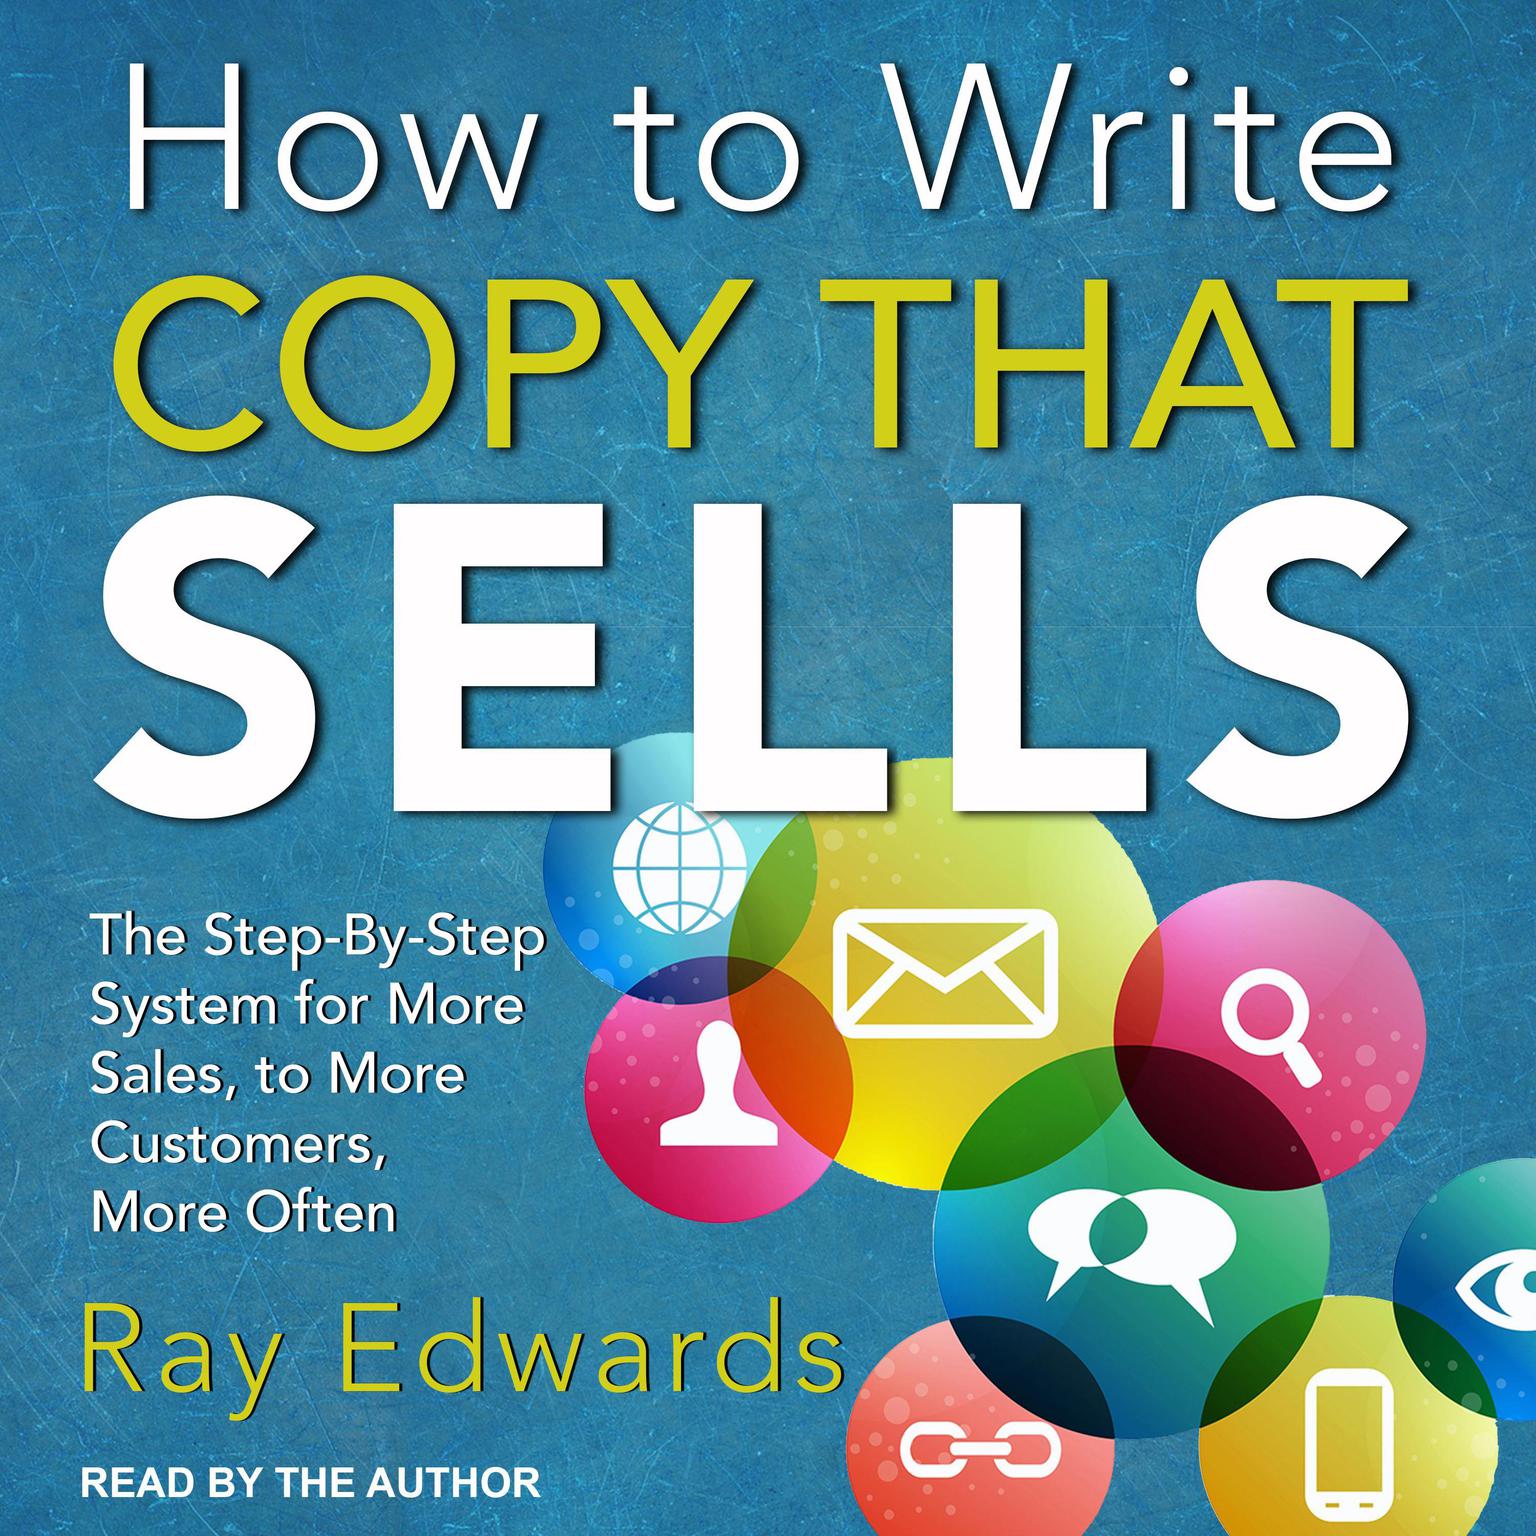 How to Write Copy That Sells: The Step-By-Step System for More Sales, to More Customers, More Often Audiobook, by Ray Edwards